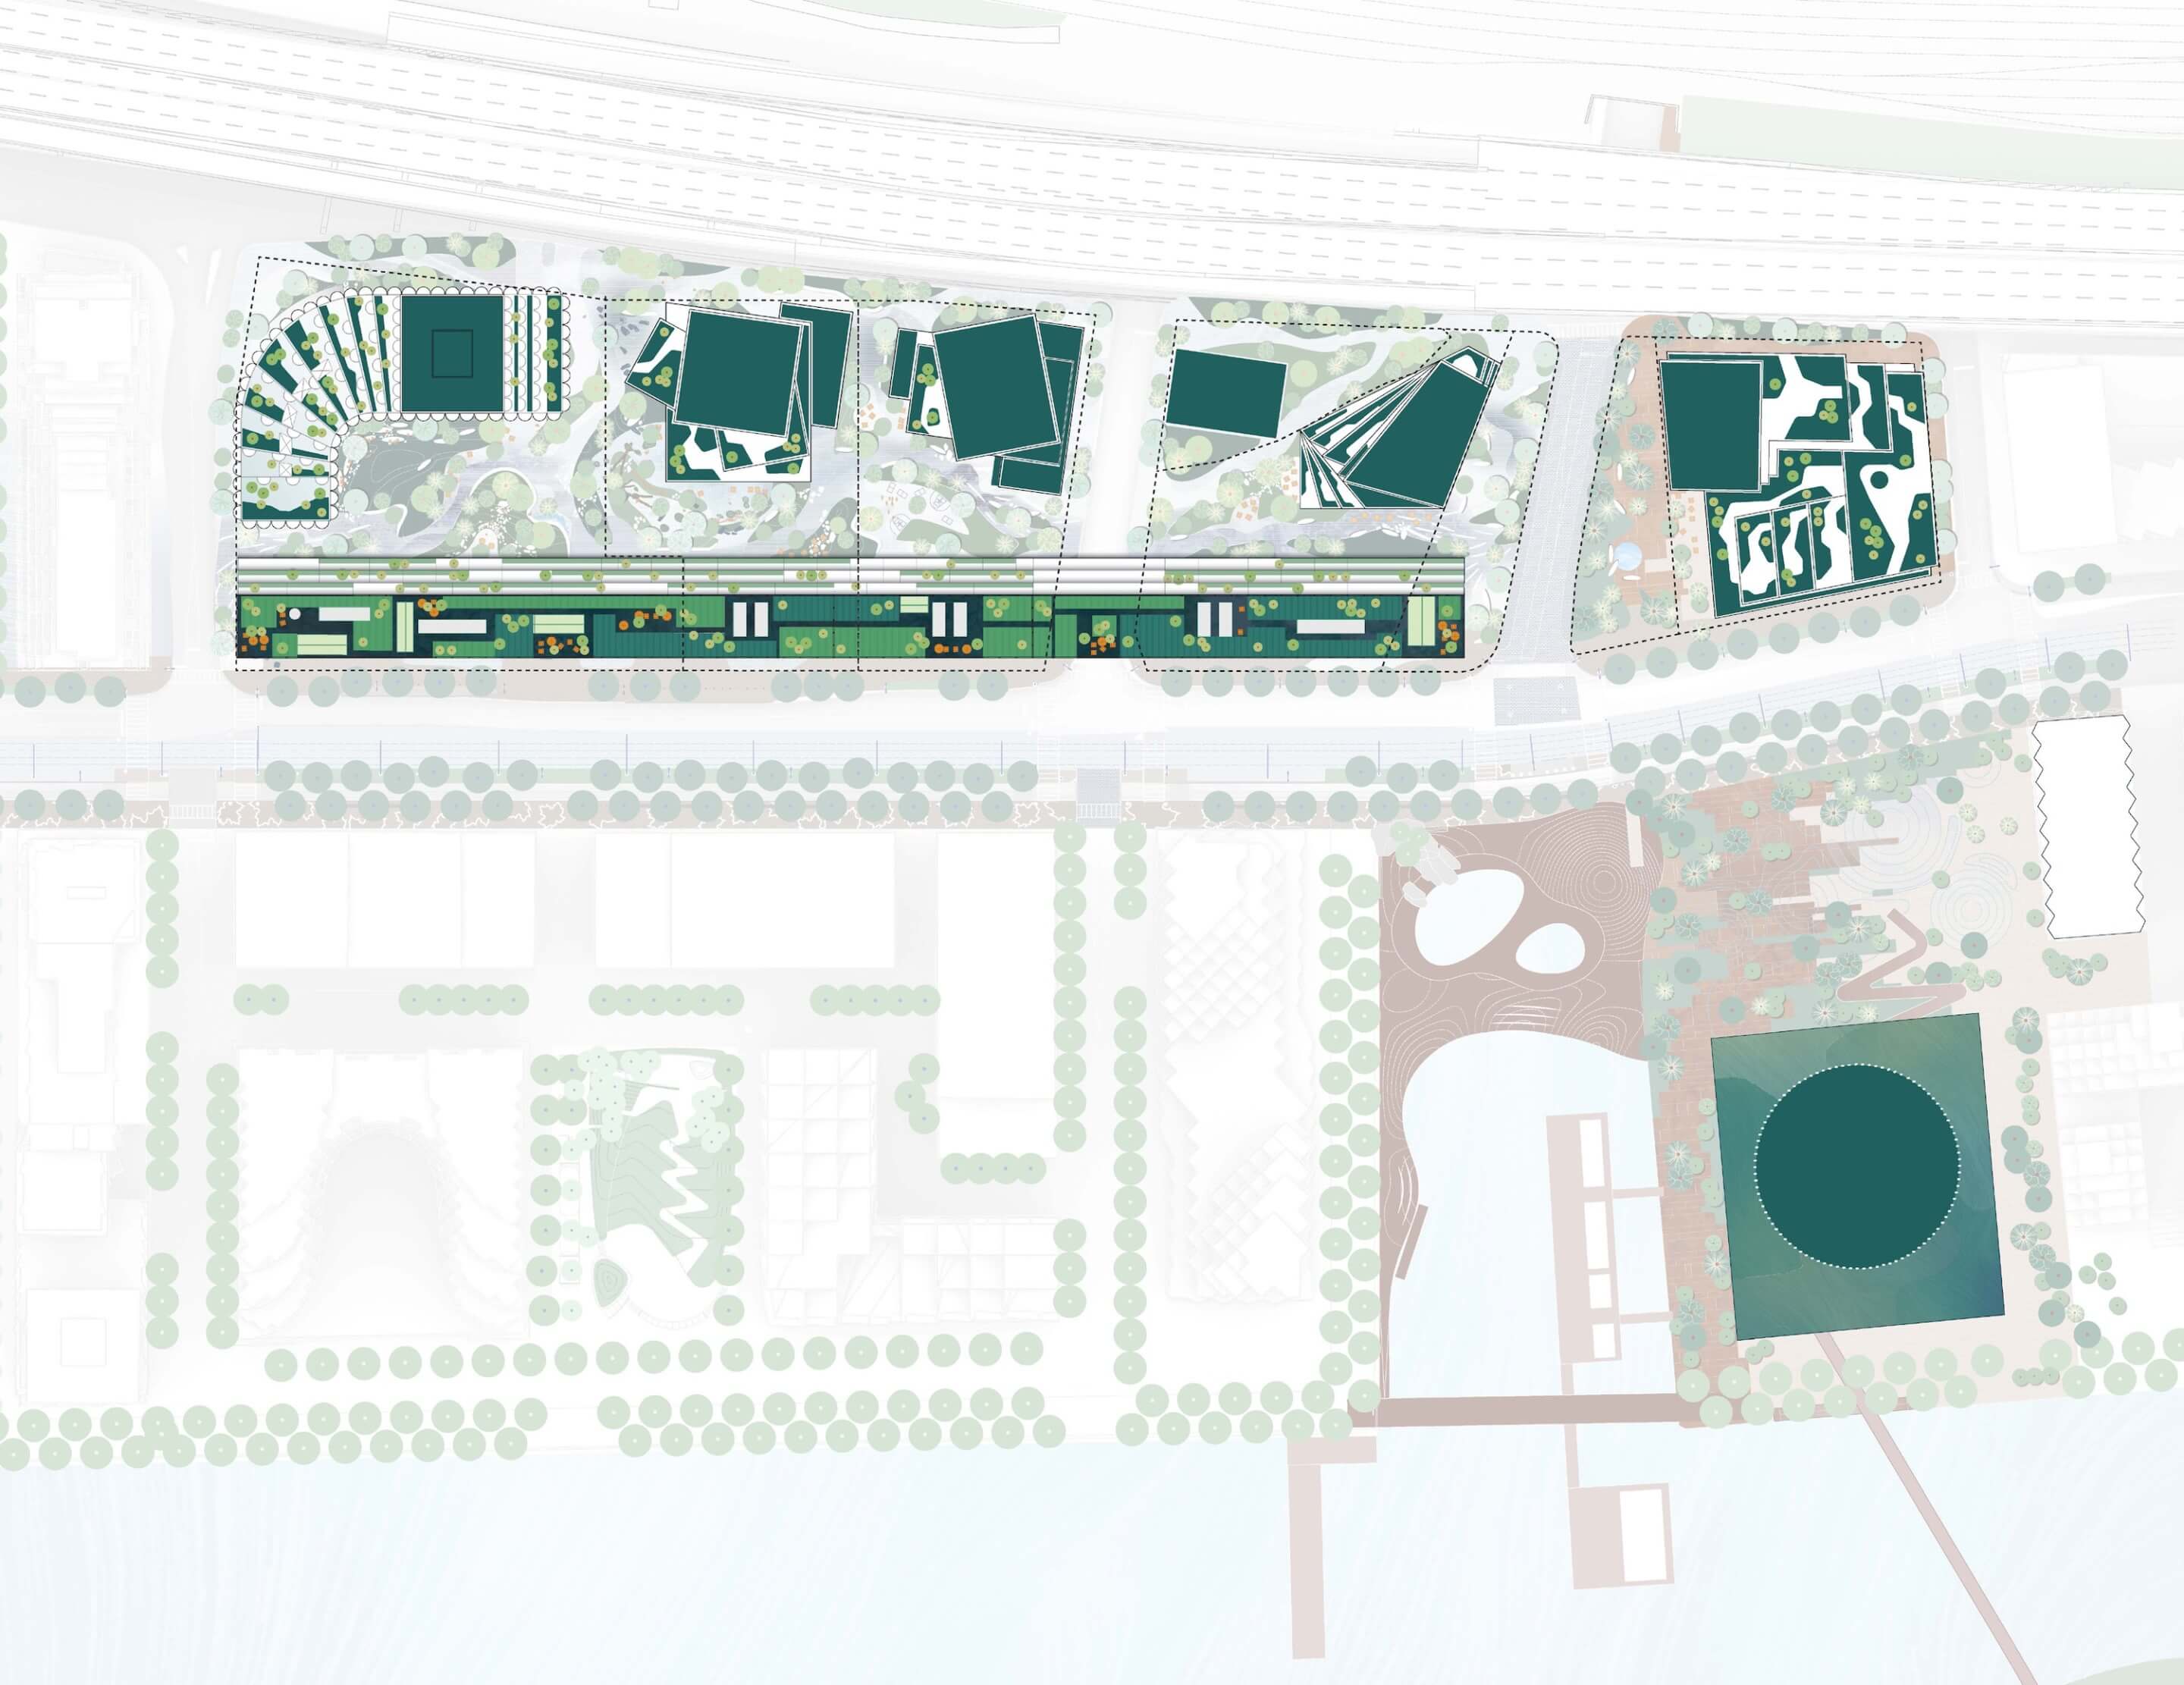 concept plan of a waterfront redevelopment zone